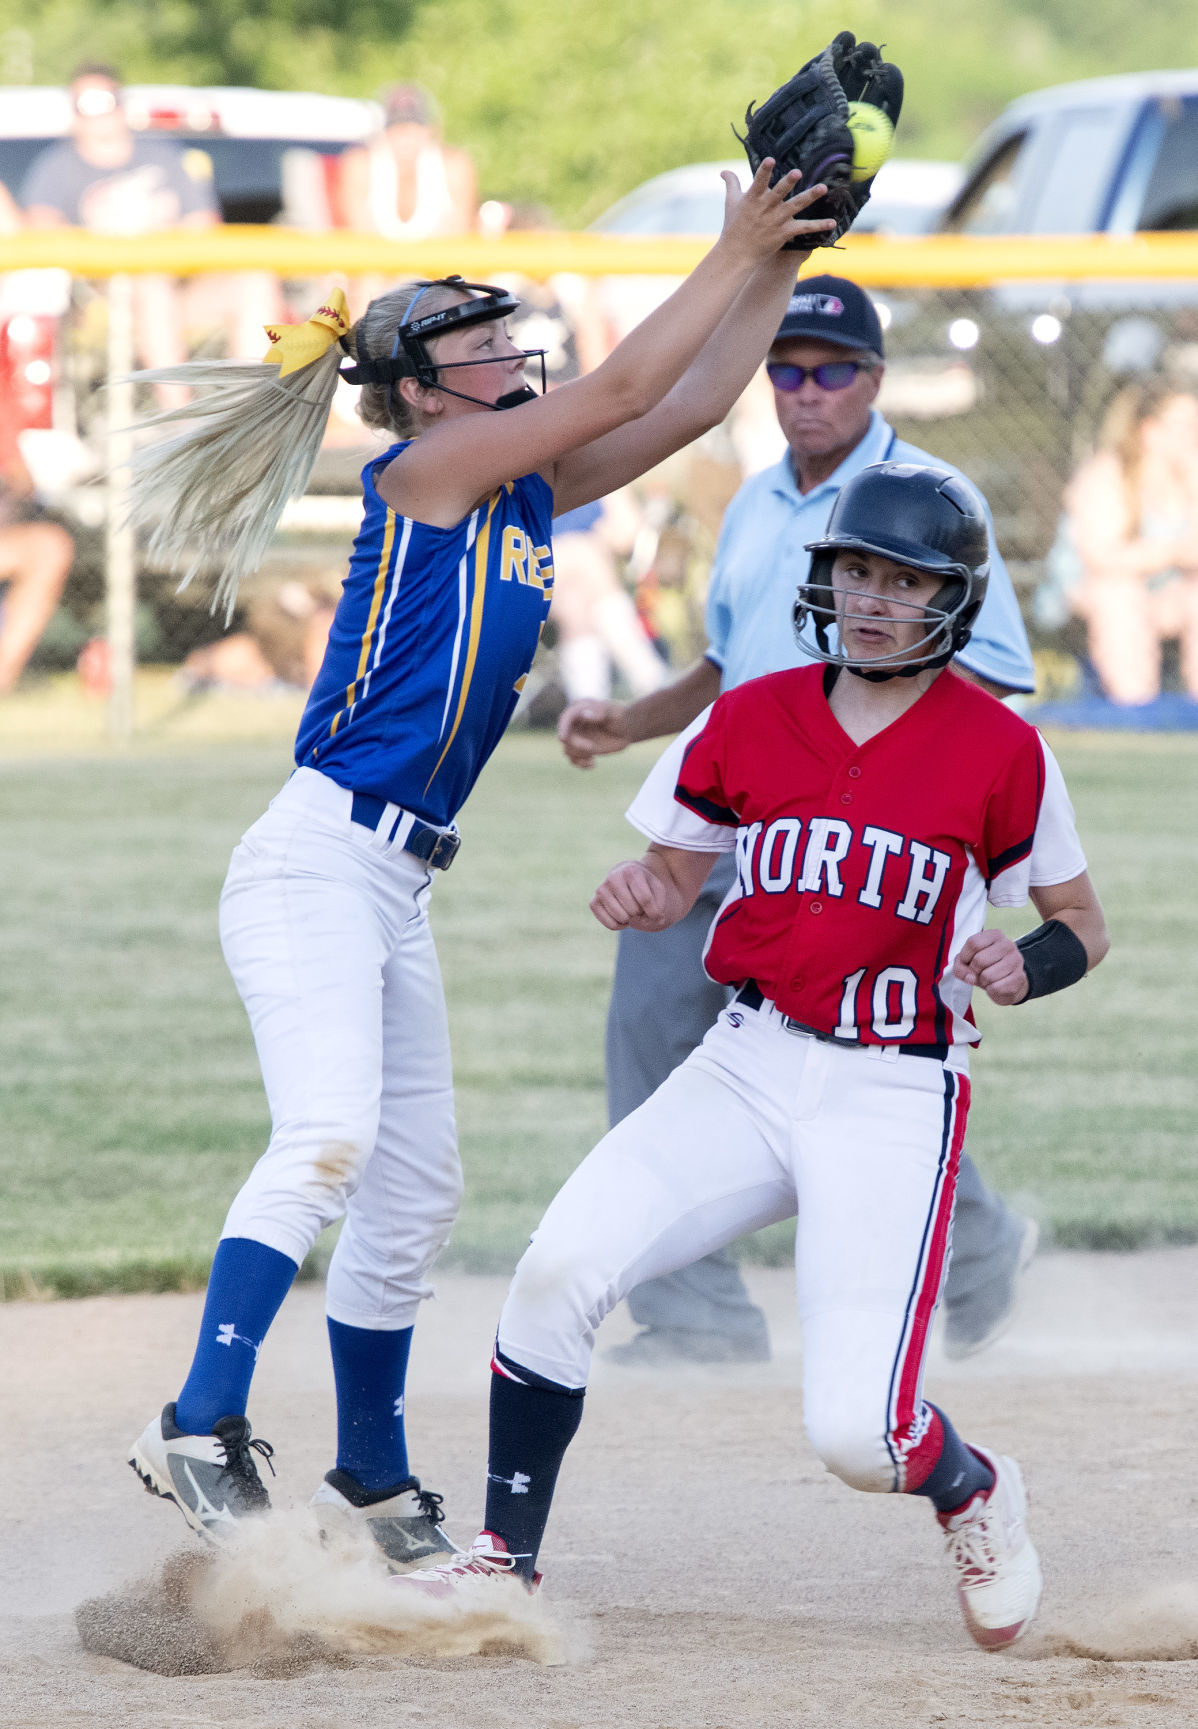 North softball starts off the season with 6-1 win over Westwood | High School | siouxcityjournal.com